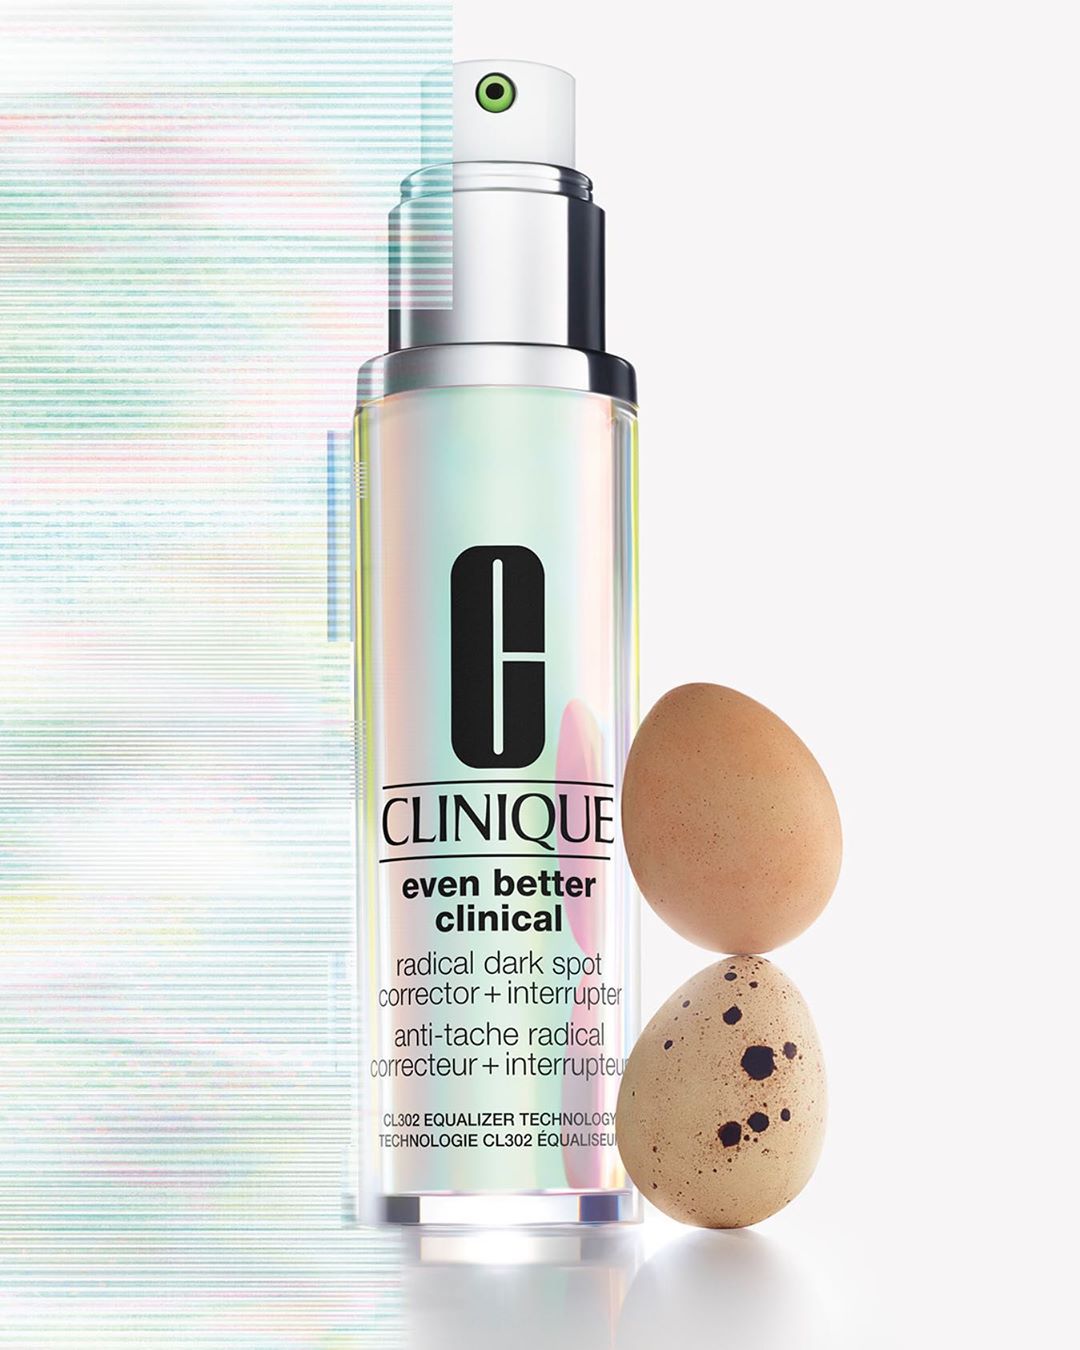 15 Beauty Products From Nordstrom That Are Worth The Coins